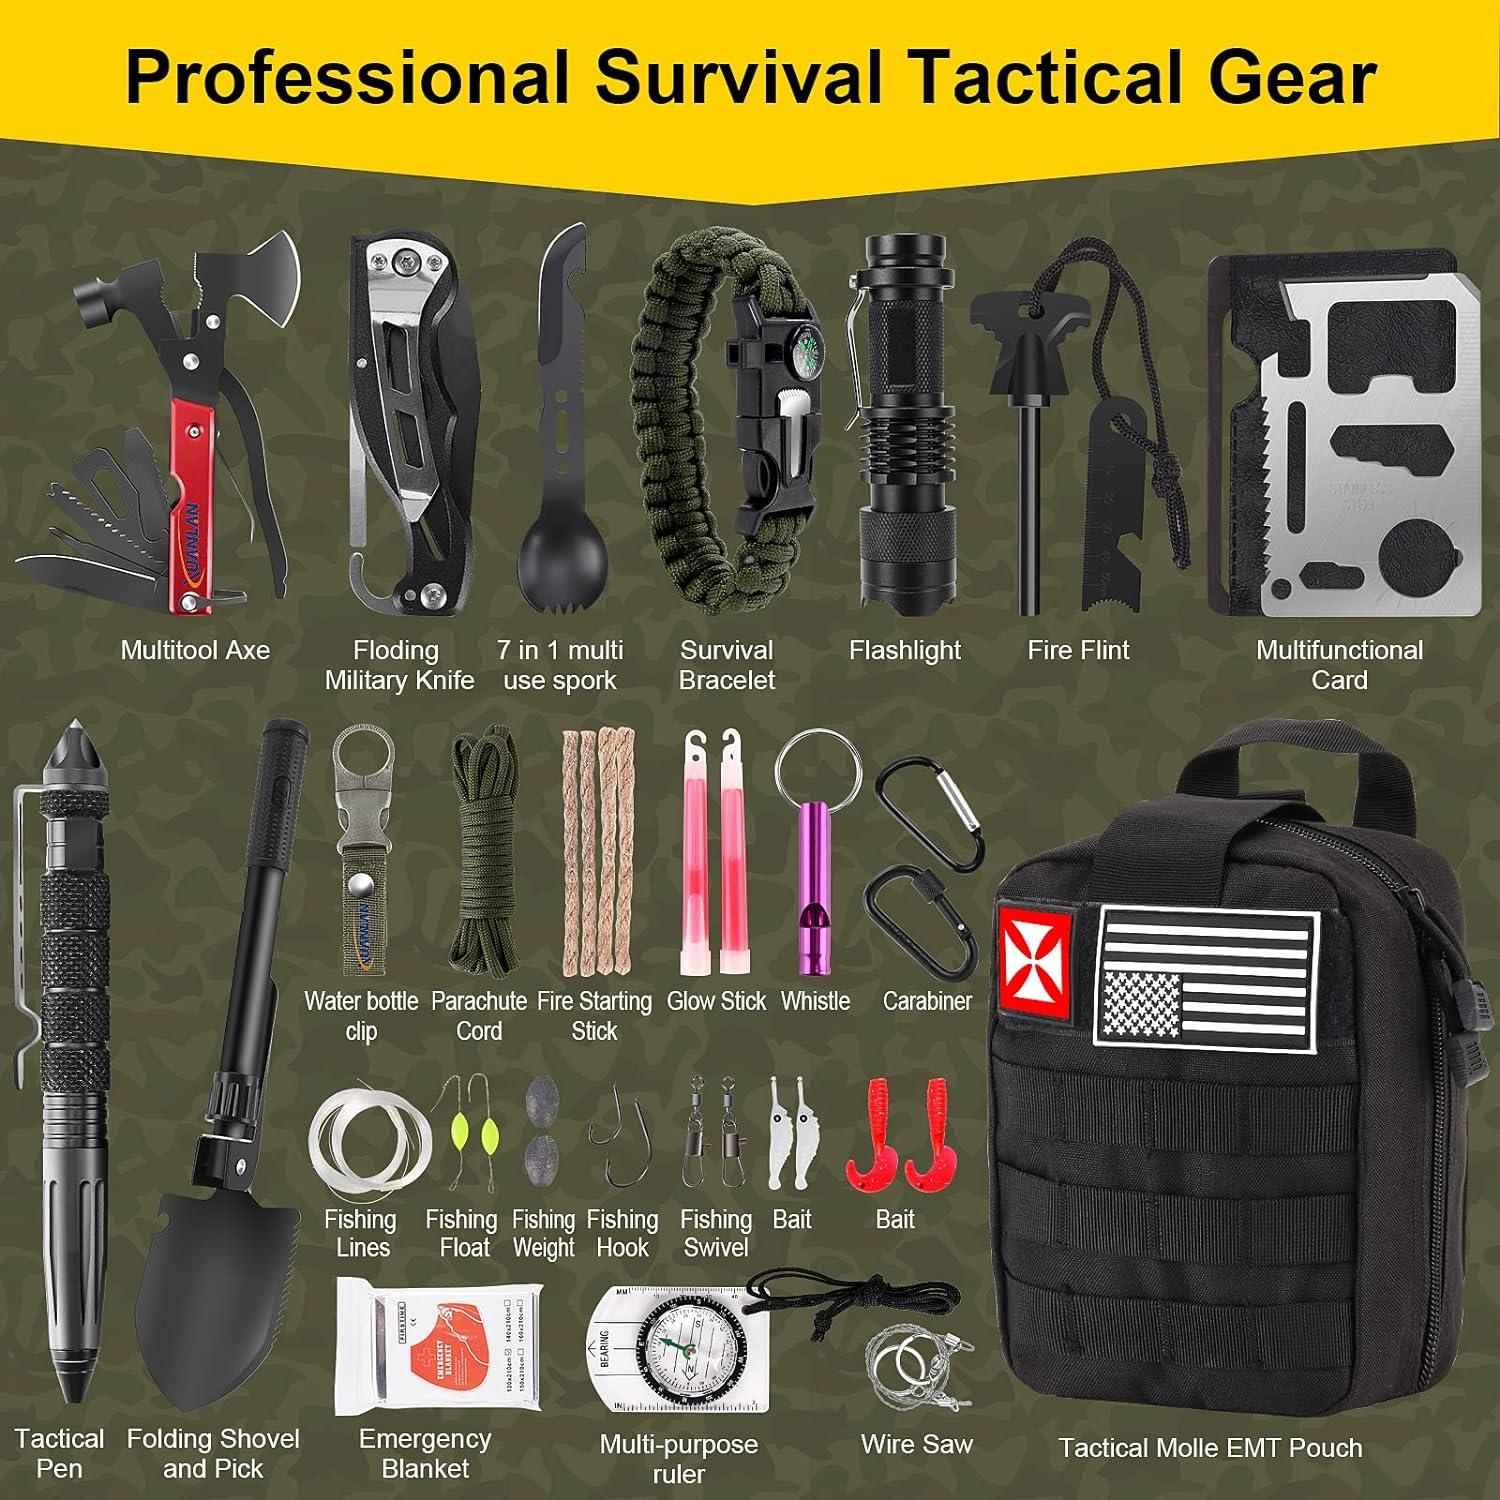 Survival First Aid Kit 248PCS Survival Tools Camping Essentials Tactical  Gear Emergency Trauma Medical Supplies Packed in a MOLLE Pouch Cool for Men  Camping Hiking Outdoor Activities Black